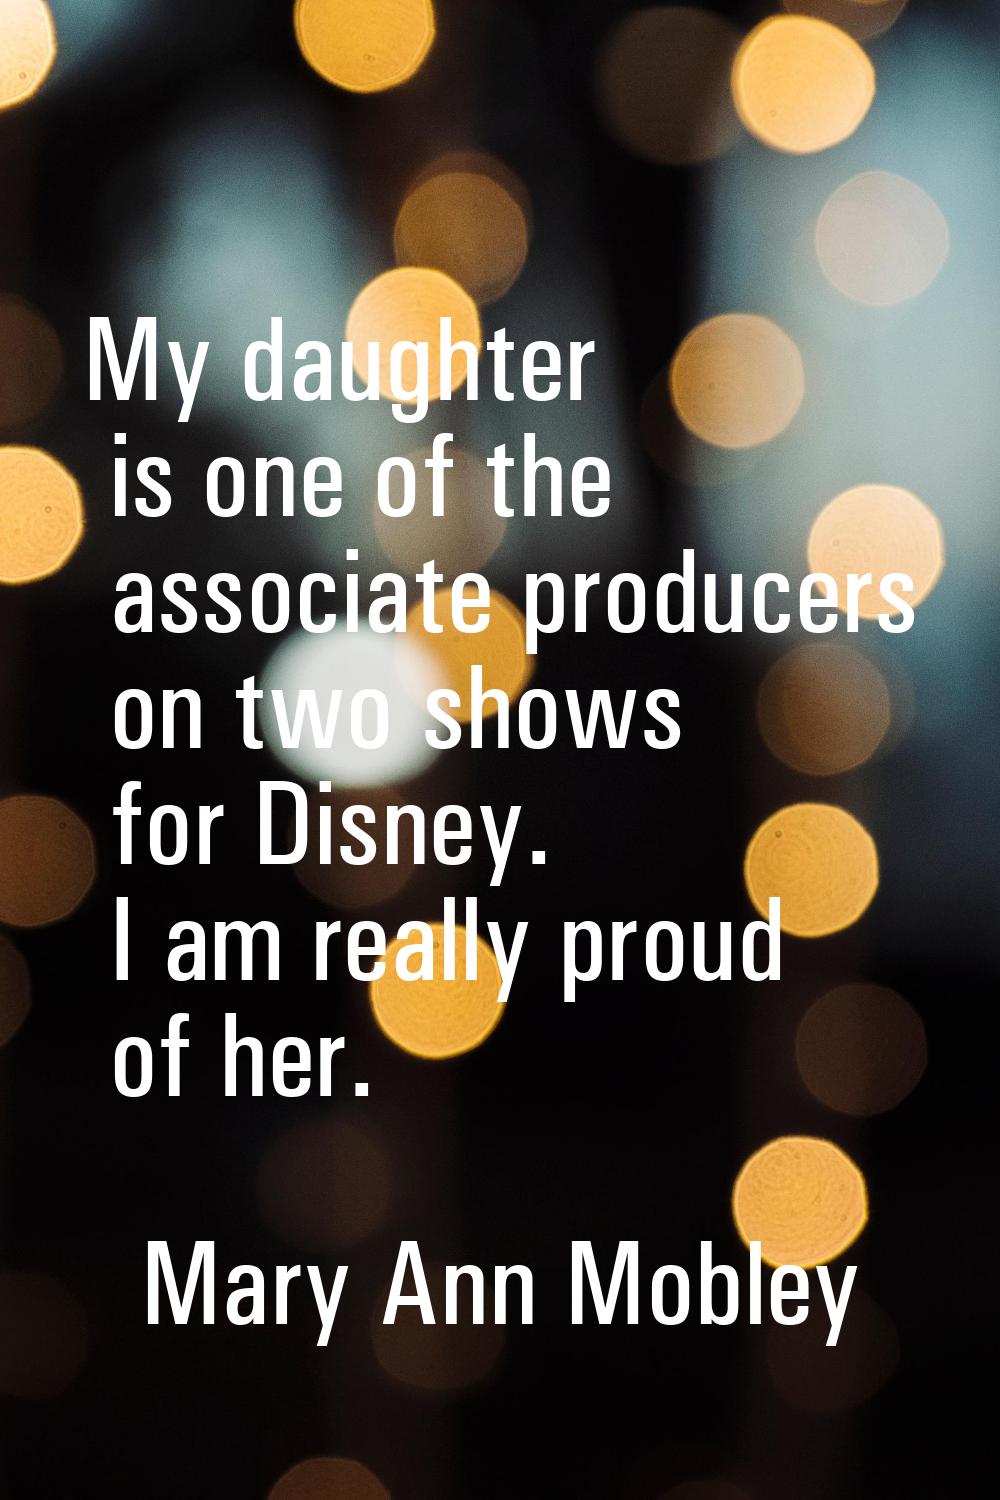 My daughter is one of the associate producers on two shows for Disney. I am really proud of her.